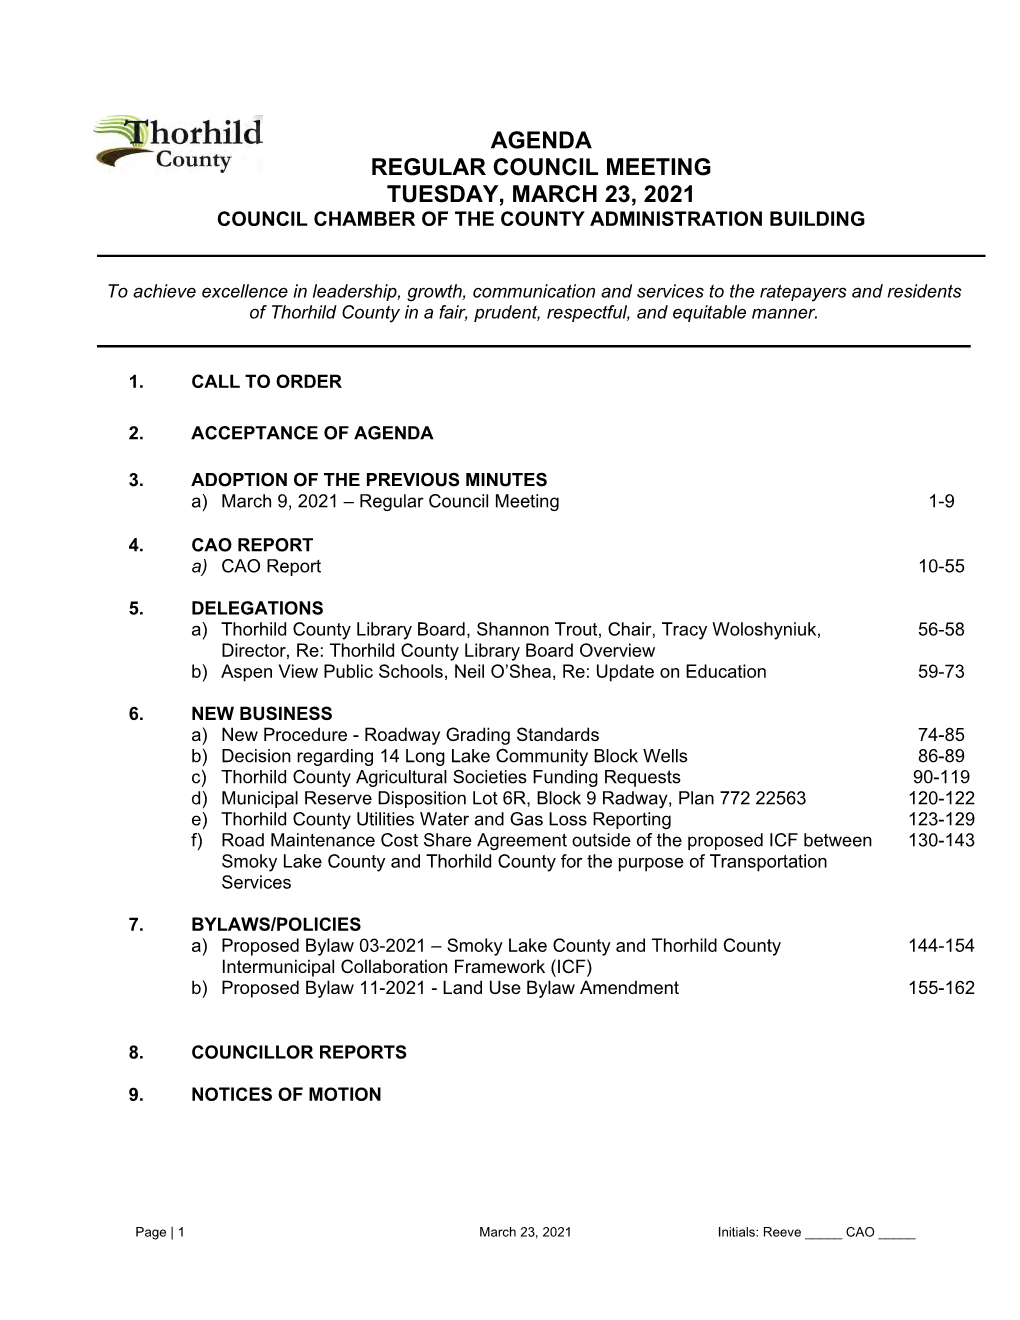 Agenda Regular Council Meeting Tuesday, March 23, 2021 Council Chamber of the County Administration Building